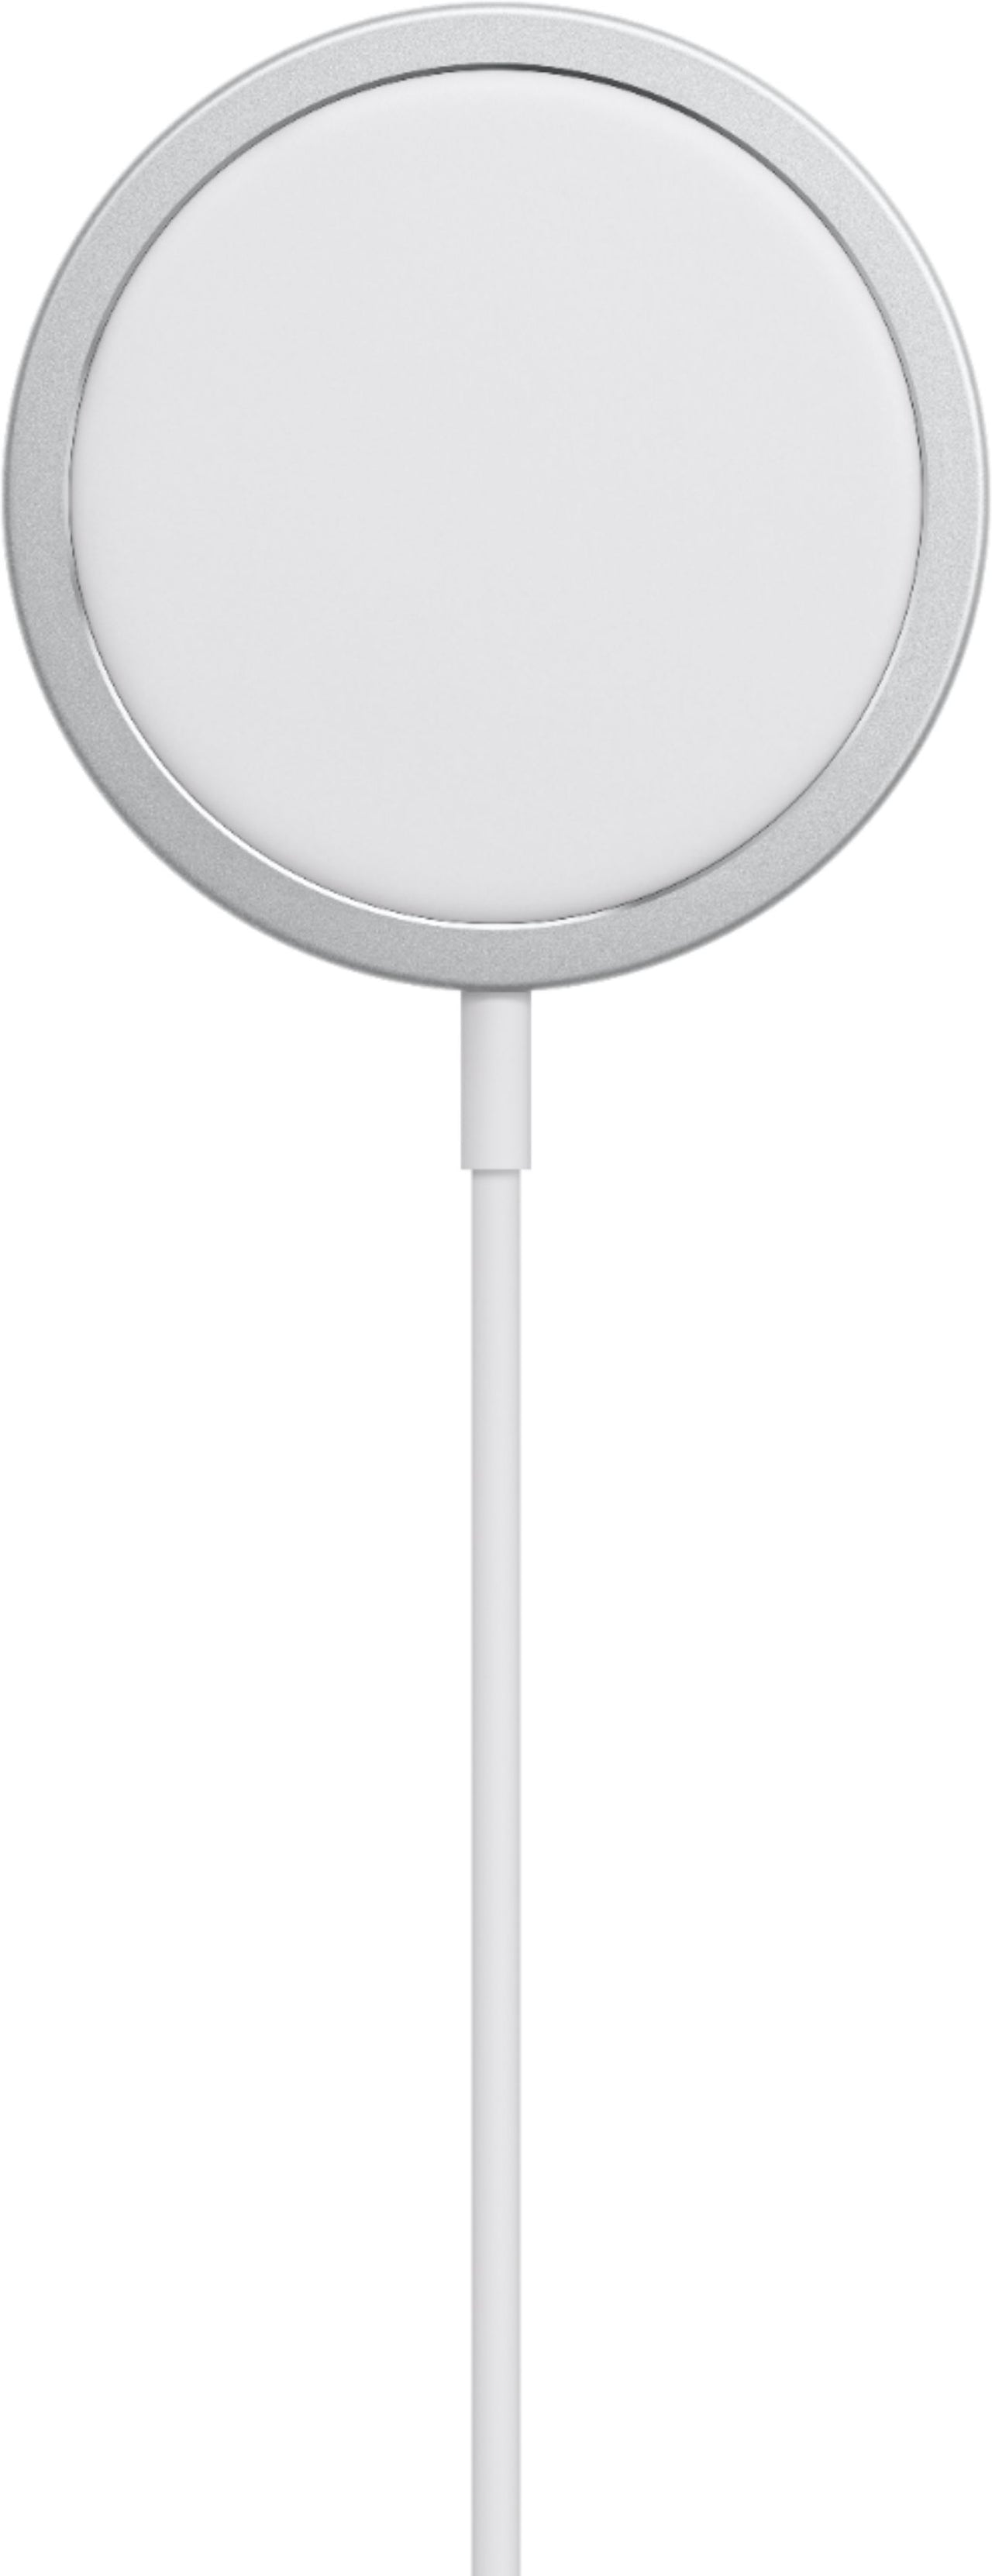 Apple MagSafe iPhone Wireless Charger - White